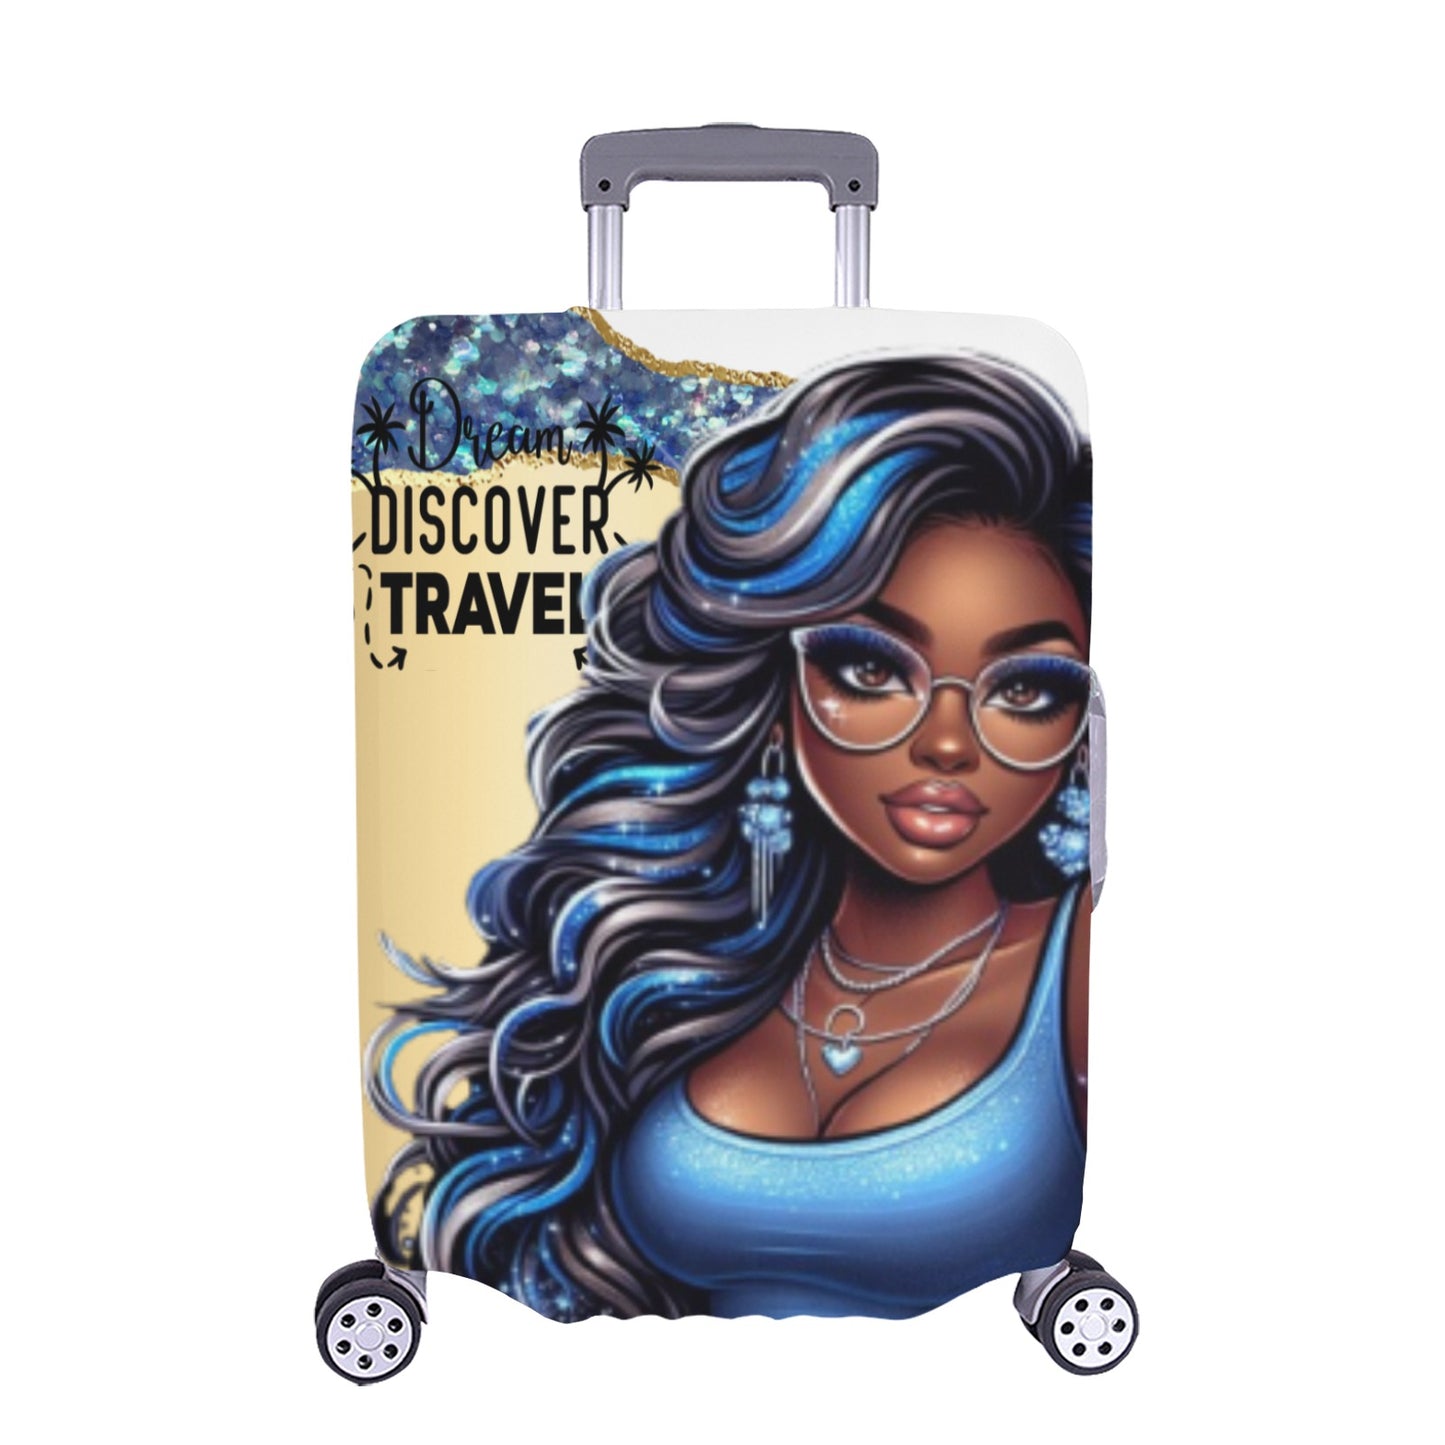 Dream, Discover Travel Tote Bag & Luggage Cover